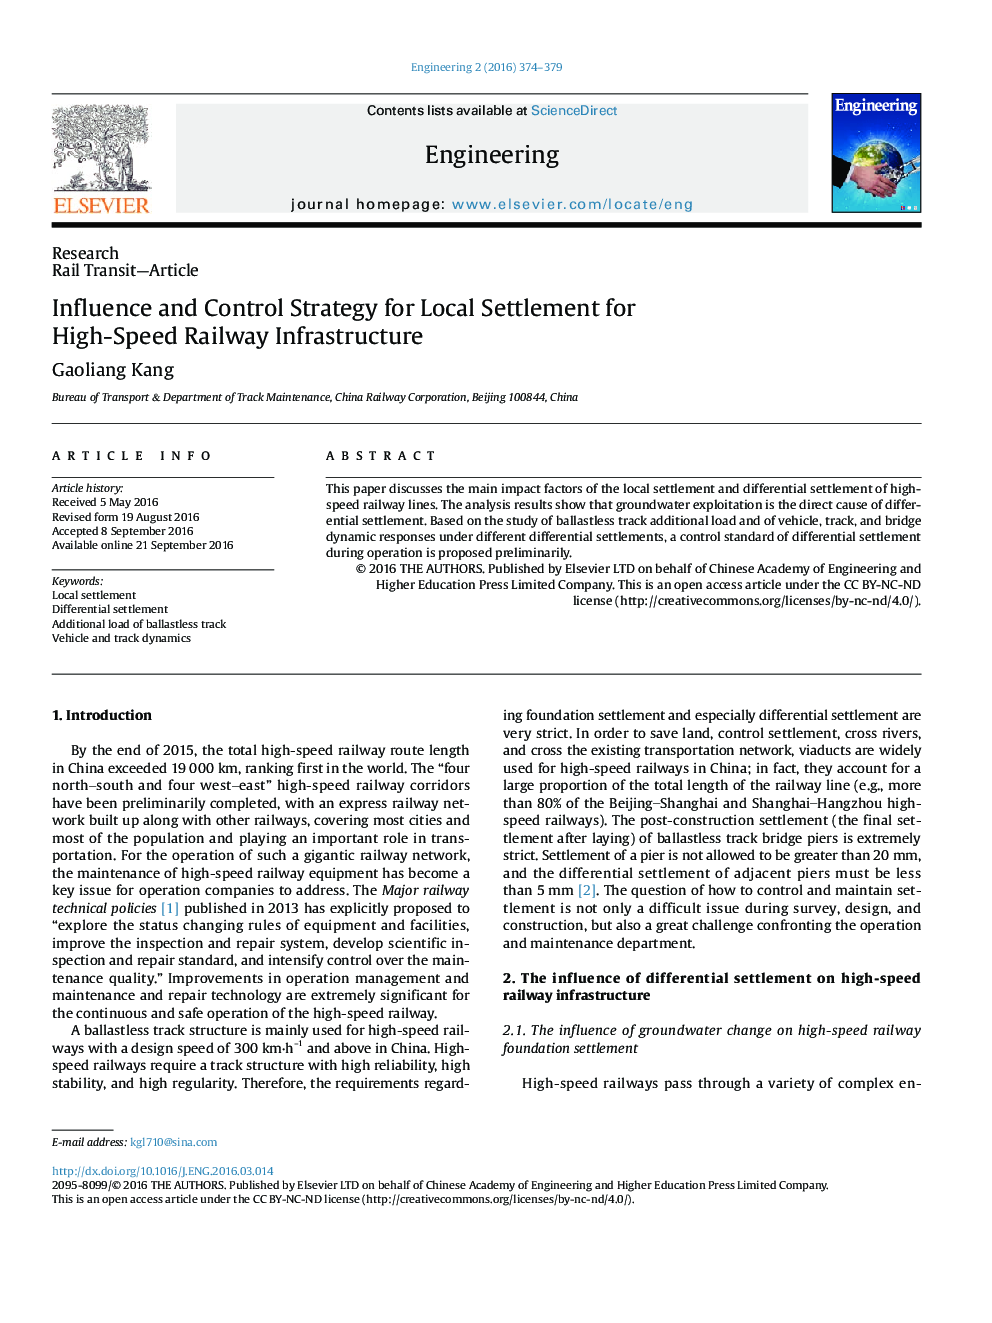 Influence and Control Strategy for Local Settlement for High-Speed Railway Infrastructure